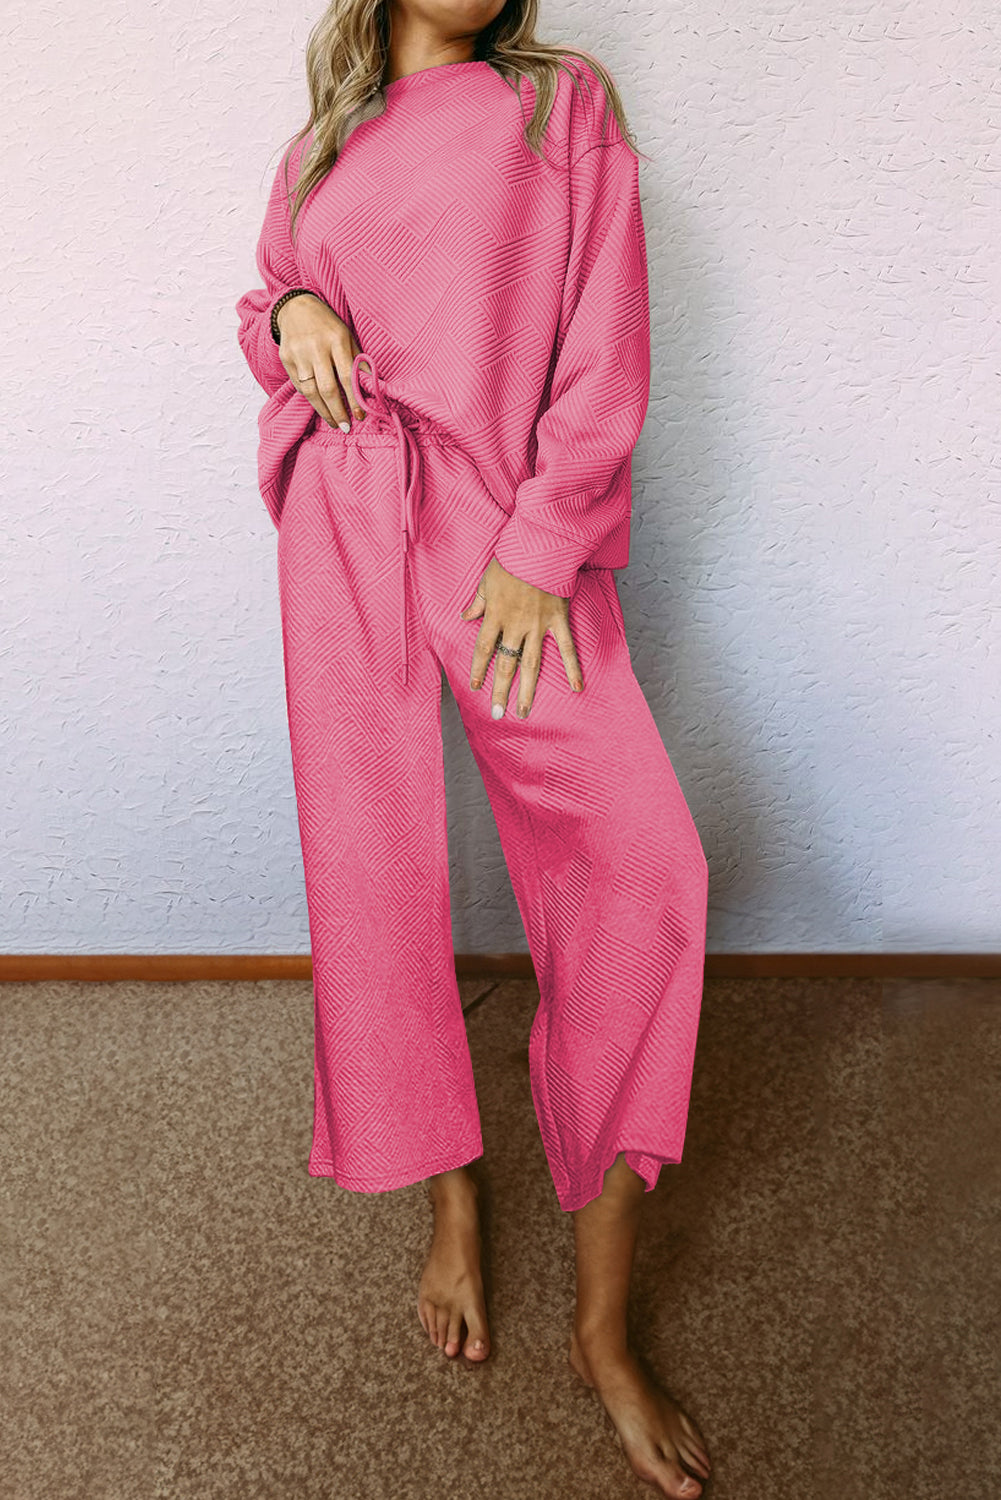 Strawberry Pink Textured Loose Slouchy Long Sleeve Top and Pants Set